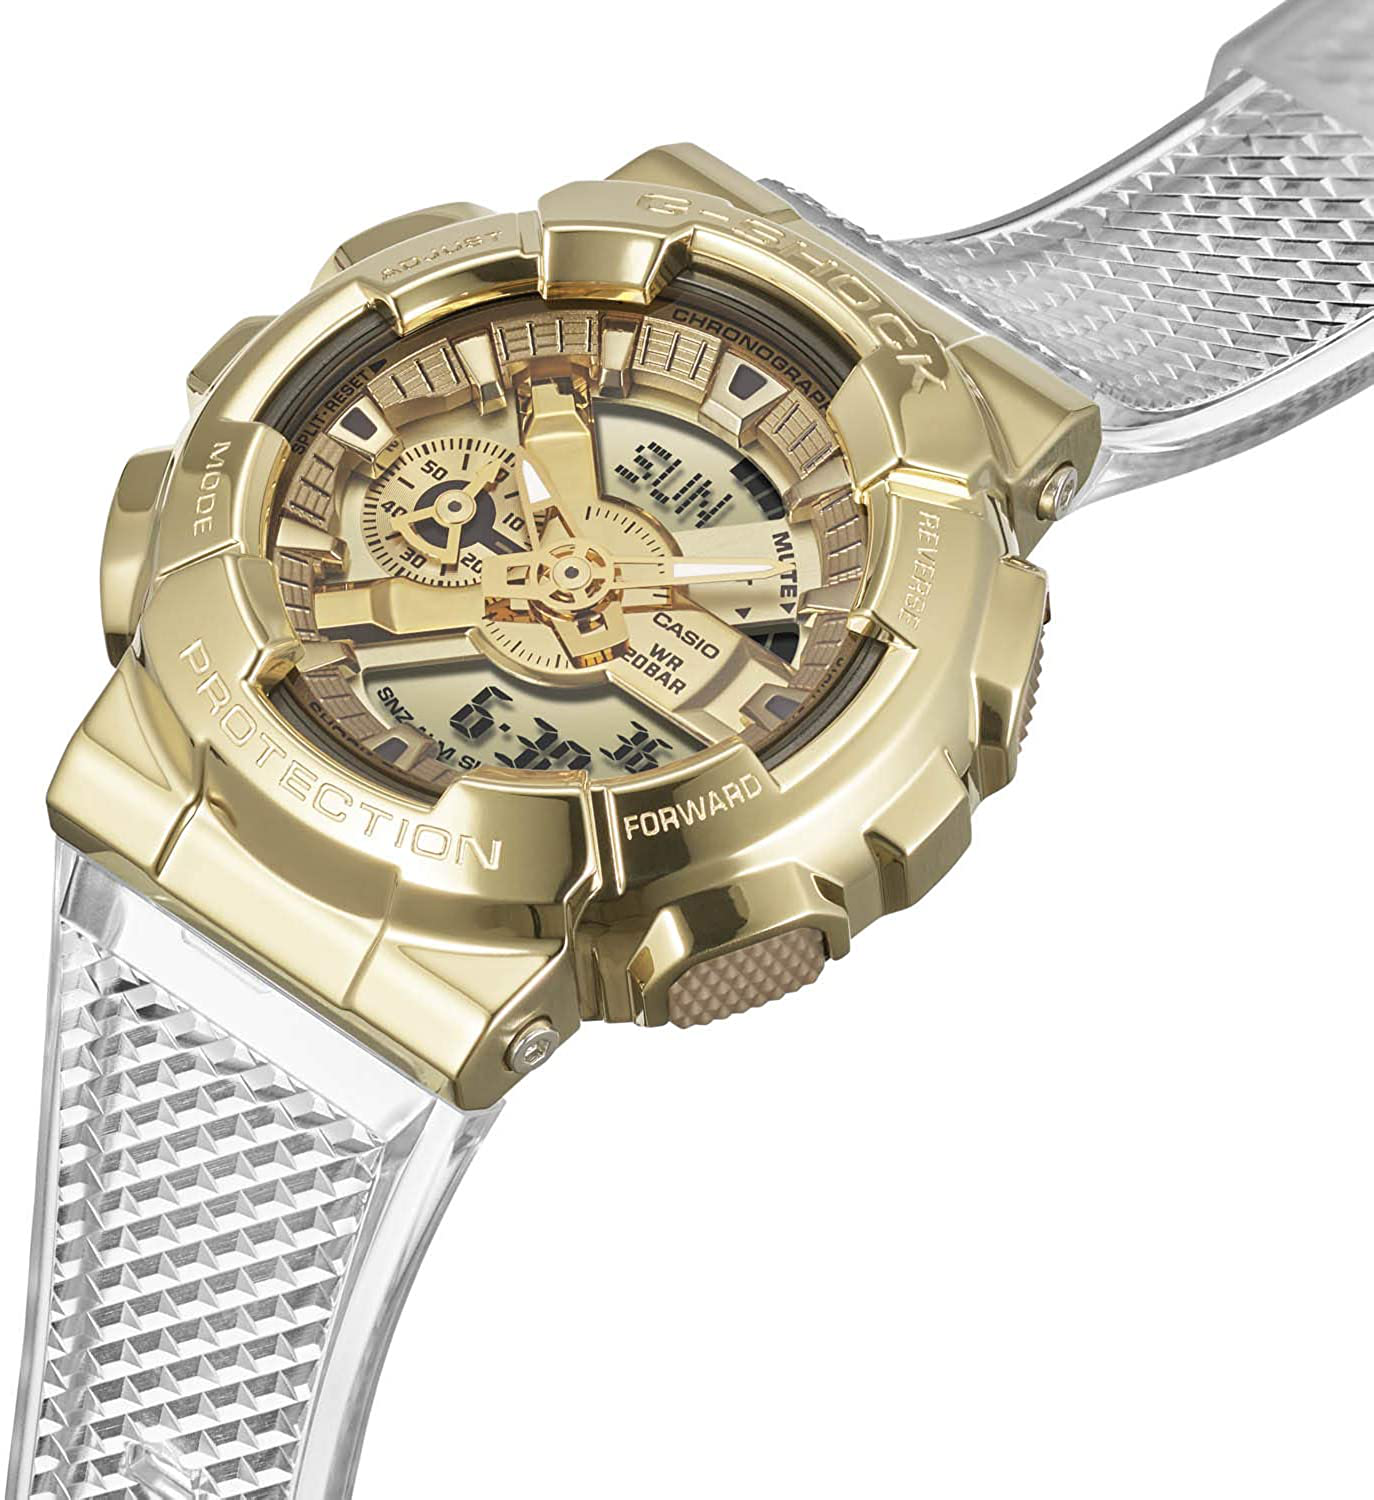 G-Shock GM110SG-9A Clear/Gold One Size